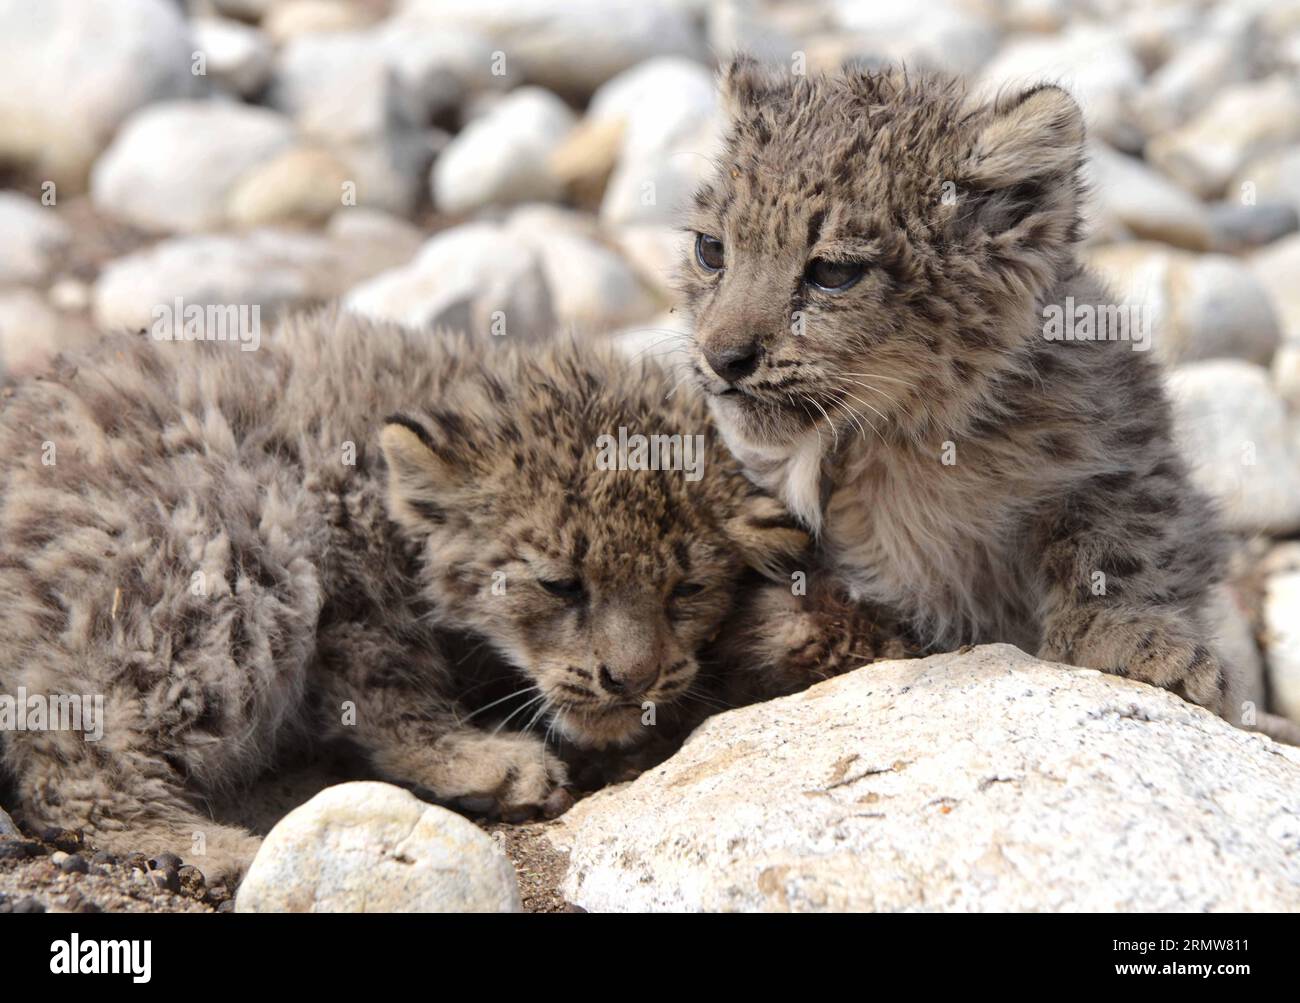 Photo taken on Oct. 8, 2014 shows the wild snow leopard cubs in Ali prefecture of southwest China s Tibet Autonomous Region. The cubs were found by a herdsman when he mowed in Ali s Qusum Township on Sept. 23, 2014. Local forestry department has discussed to protect and raise the rare cubs. ) (hdt) CHINA-TIBET-SNOW LEOPARD (CN ) GexQingmin PUBLICATIONxNOTxINxCHN   Photo Taken ON OCT 8 2014 Shows The Wild Snow Leopard Cubs in Ali Prefecture of Southwest China S Tibet Autonomous Region The Cubs Were Found by a herdsman When he mowed in Ali S  Township ON Sept 23 2014 Local Forestry Department ha Stock Photo